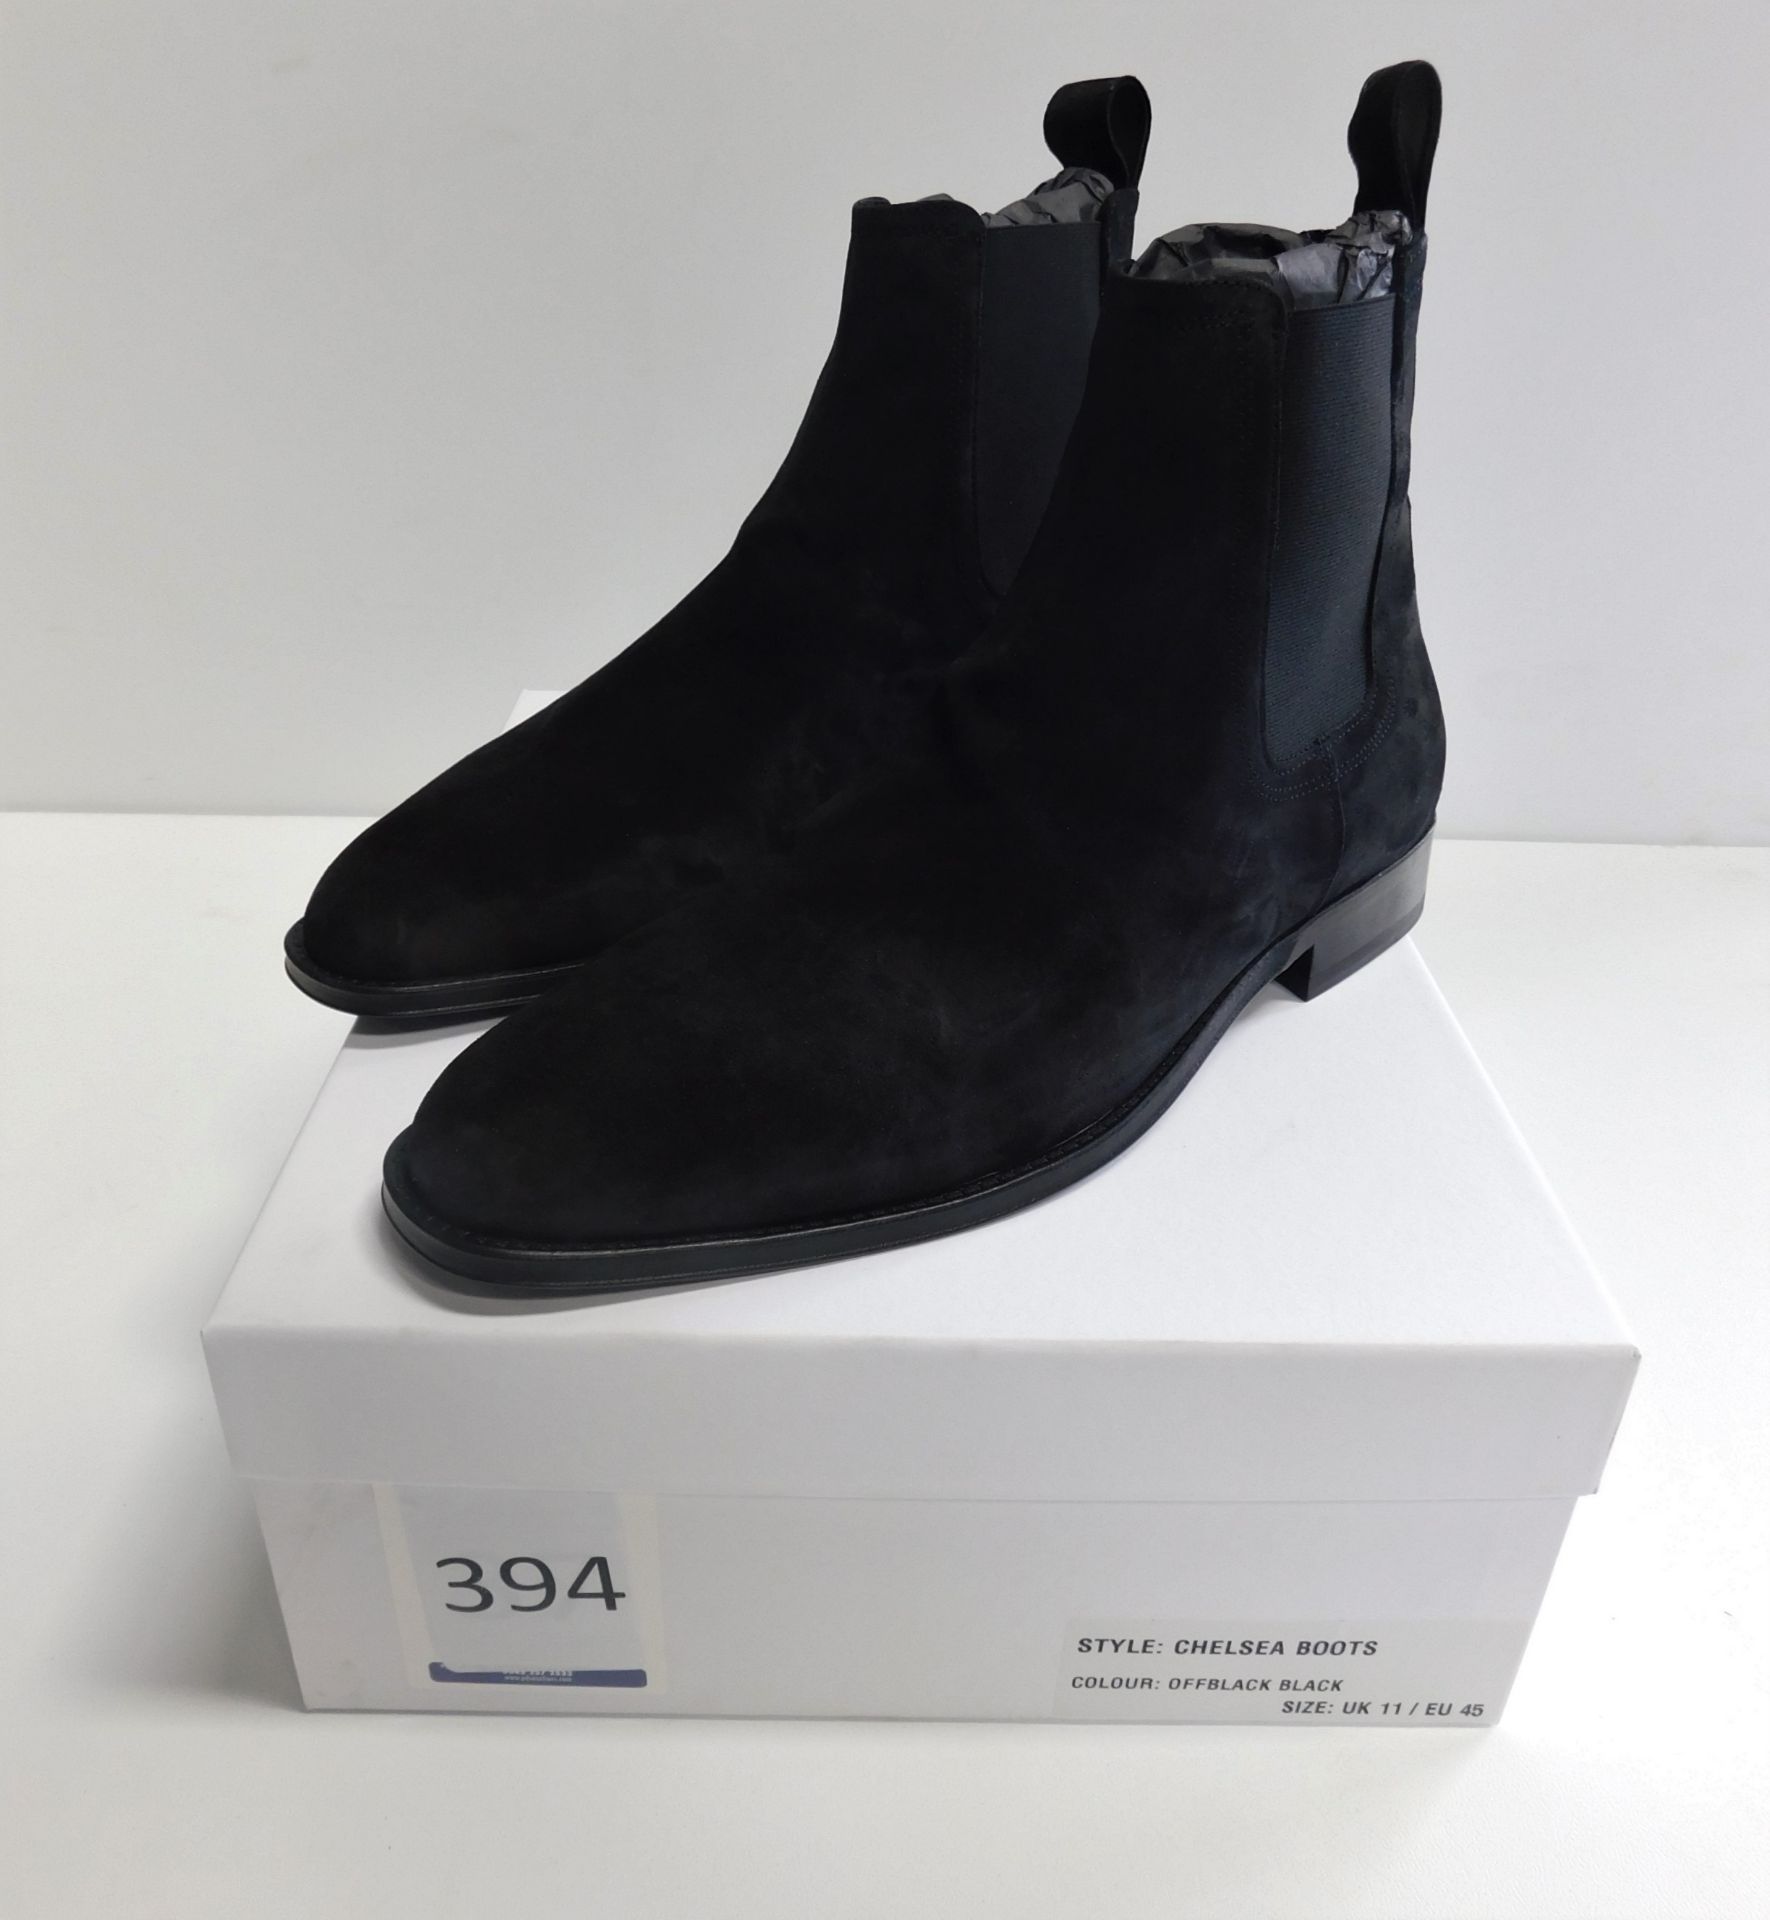 Pair of Ardent “Offblack Black” Chelsea Boots, Size 11 (Located: Brentwood. Please Refer to